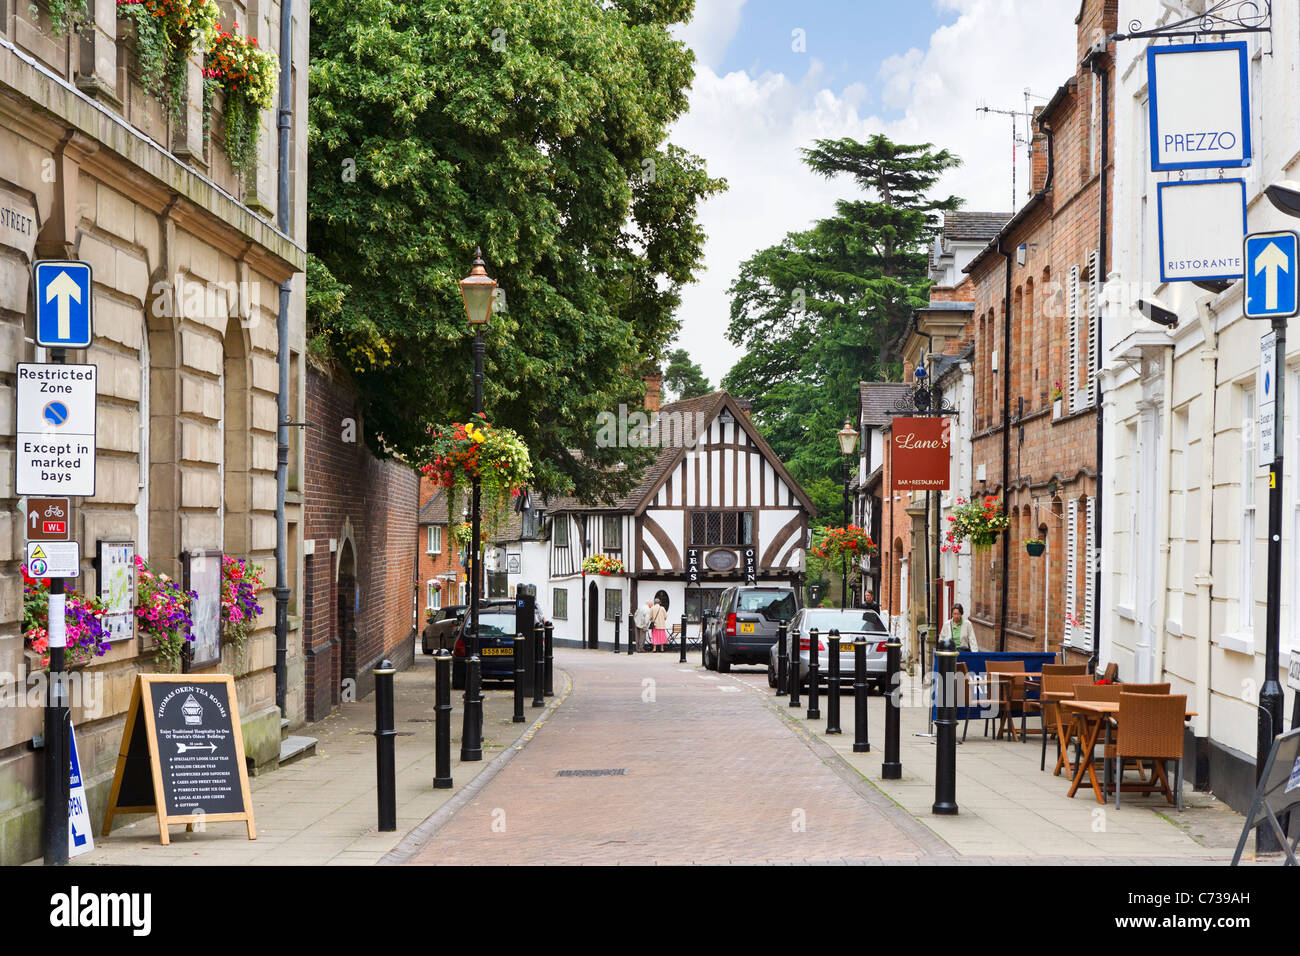 Cafes and restaurants on Castle Street in the old town centre, Warwick, Warwickshire, England, UK Stock Photo